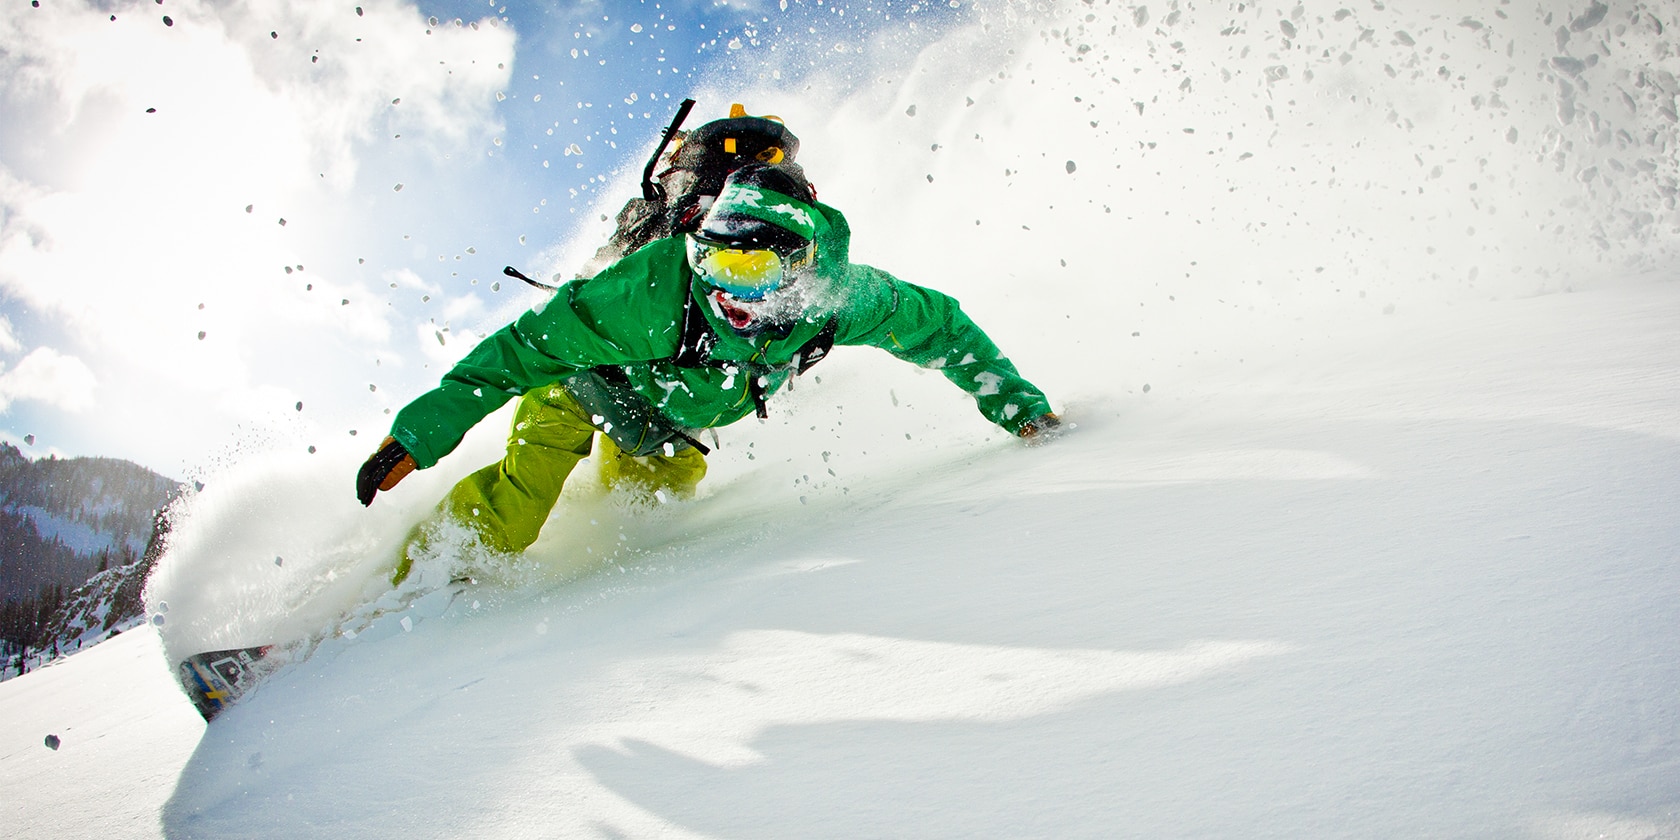 man wearing green snow suit turns fast on a snowboard causing snow to fly into the air